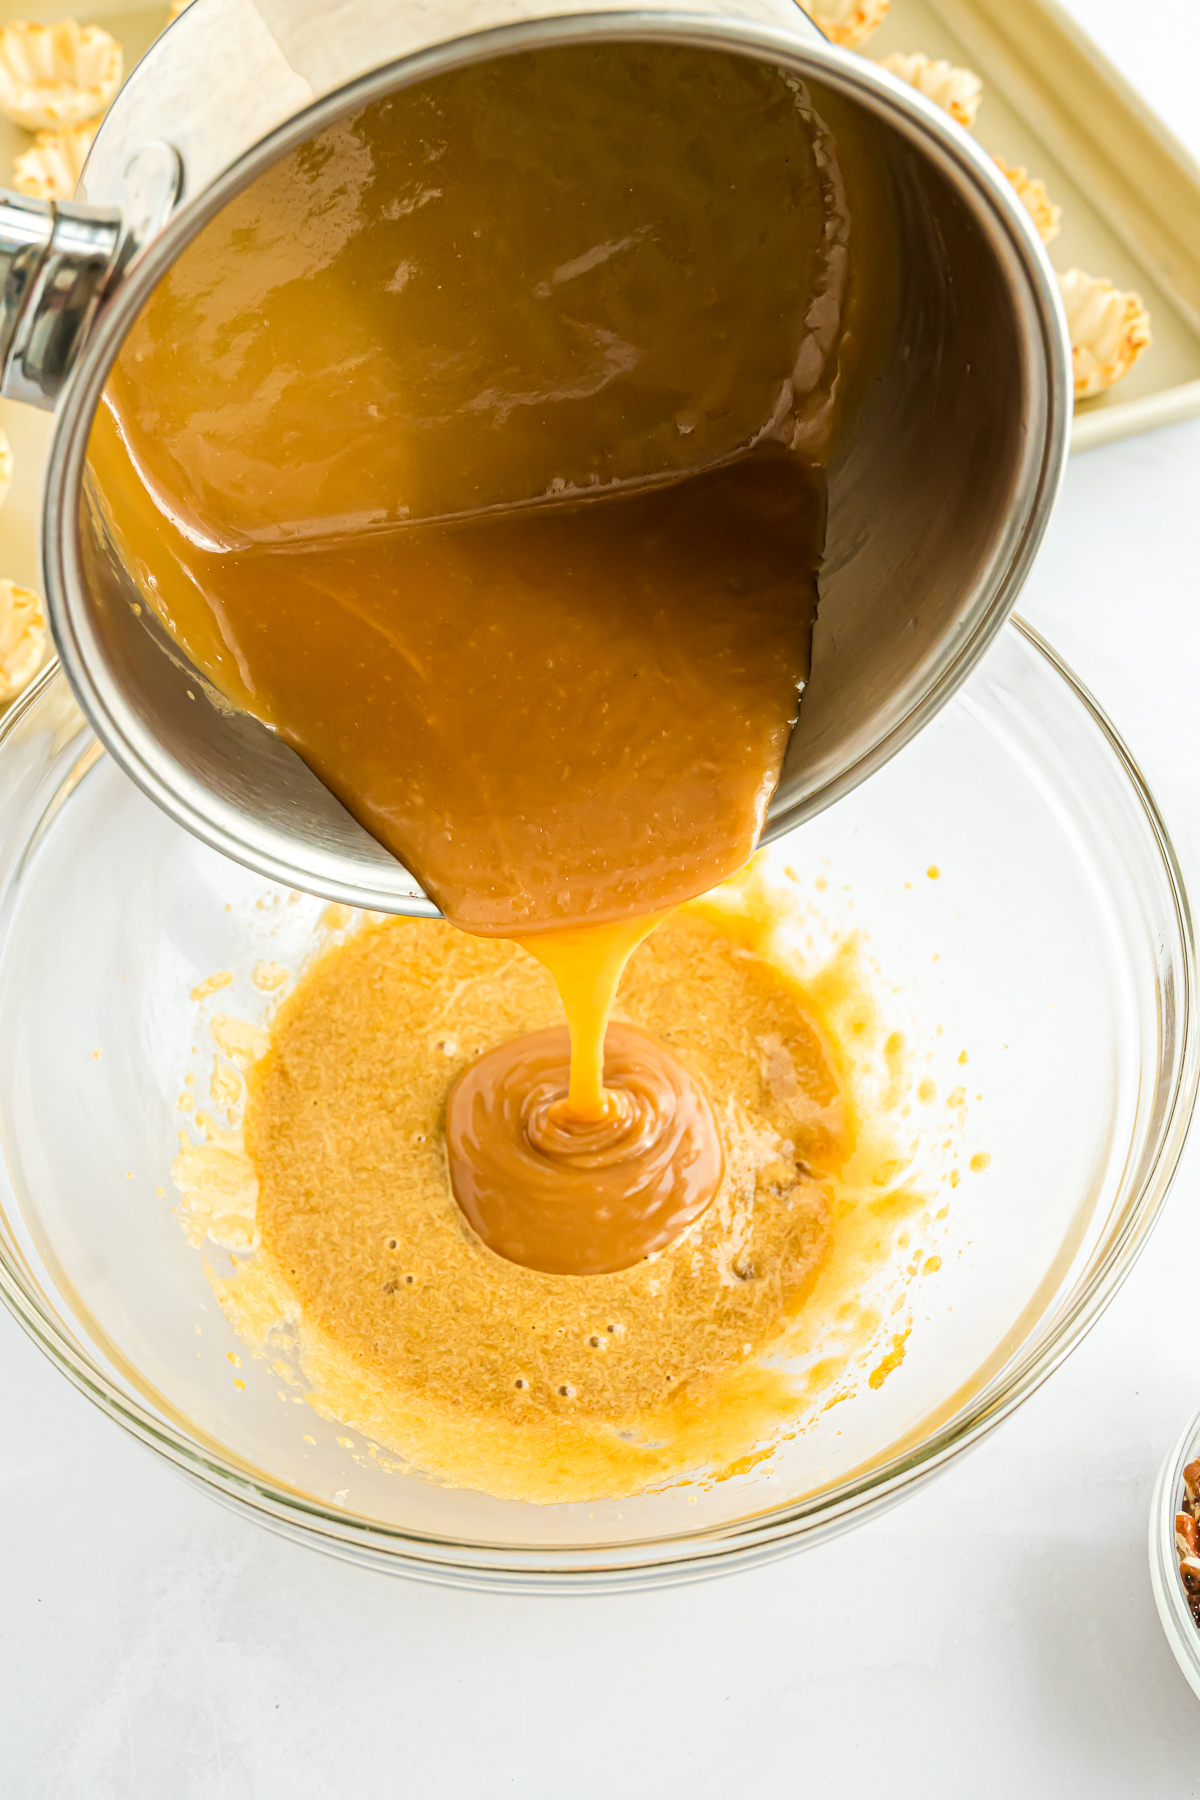 Caramel sauce being poured over a Mini Pecan Pie.